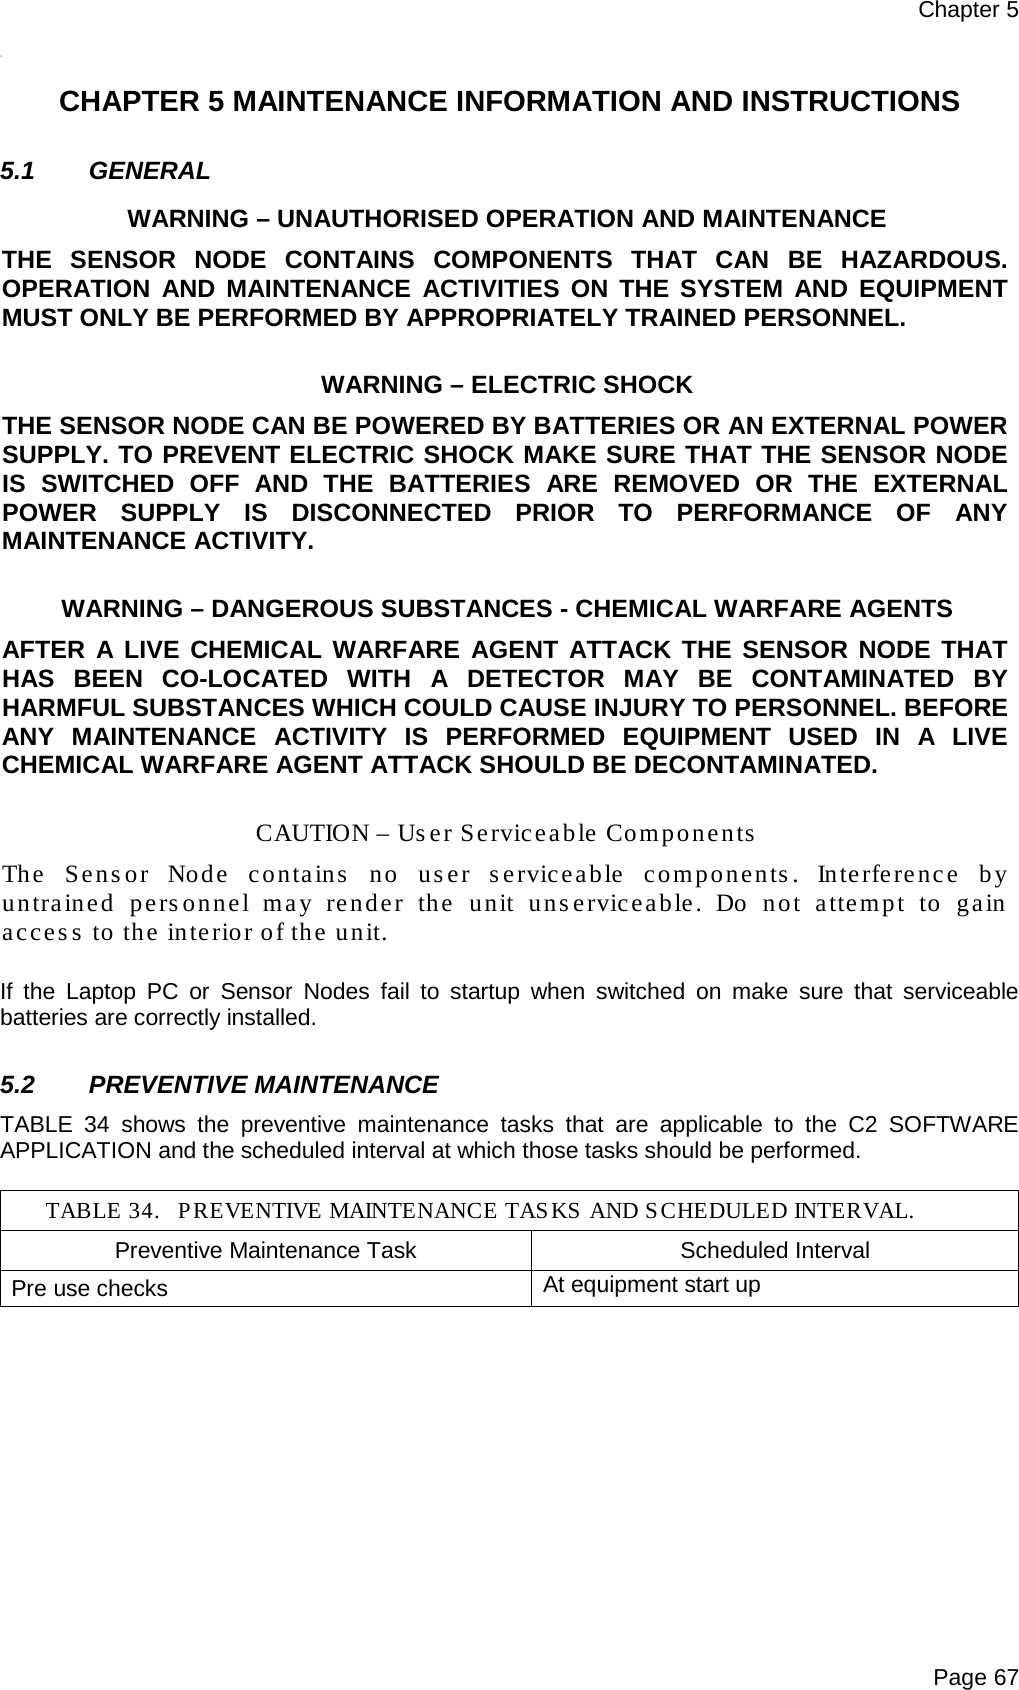 Chapter 5 Page 67 *4   CHAPTER 5 MAINTENANCE INFORMATION AND INSTRUCTIONS  5.1 GENERAL WARNING – UNAUTHORISED OPERATION AND MAINTENANCE THE  SENSOR NODE CONTAINS COMPONENTS THAT CAN BE HAZARDOUS. OPERATION AND MAINTENANCE ACTIVITIES ON THE SYSTEM AND EQUIPMENT MUST ONLY BE PERFORMED BY APPROPRIATELY TRAINED PERSONNEL.  WARNING – ELECTRIC SHOCK THE SENSOR NODE CAN BE POWERED BY BATTERIES OR AN EXTERNAL POWER SUPPLY. TO PREVENT ELECTRIC SHOCK MAKE SURE THAT THE SENSOR NODE IS SWITCHED OFF AND THE BATTERIES ARE REMOVED OR THE EXTERNAL POWER SUPPLY IS DISCONNECTED PRIOR TO PERFORMANCE OF ANY MAINTENANCE ACTIVITY.  WARNING – DANGEROUS SUBSTANCES - CHEMICAL WARFARE AGENTS AFTER A LIVE CHEMICAL WARFARE AGENT ATTACK THE SENSOR NODE THAT HAS BEEN CO-LOCATED WITH A DETECTOR MAY BE CONTAMINATED BY HARMFUL SUBSTANCES WHICH COULD CAUSE INJURY TO PERSONNEL. BEFORE ANY MAINTENANCE ACTIVITY IS PERFORMED EQUIPMENT USED IN A LIVE CHEMICAL WARFARE AGENT ATTACK SHOULD BE DECONTAMINATED.  CAUTION – User Serviceable Components The  Sensor Node contains no user serviceable components. Interference by untrained personnel may render the unit unserviceable. Do not attempt to gain access to the interior of the unit.  If the Laptop PC  or  Sensor Nodes fail to startup when switched on make sure that serviceable batteries are correctly installed.  5.2 PREVENTIVE MAINTENANCE TABLE 34 shows the preventive maintenance tasks that are applicable to the C2 SOFTWARE APPLICATION and the scheduled interval at which those tasks should be performed.  TABLE 34. PREVENTIVE MAINTENANCE TASKS AND SCHEDULED INTERVAL. Preventive Maintenance Task Scheduled Interval Pre use checks At equipment start up   